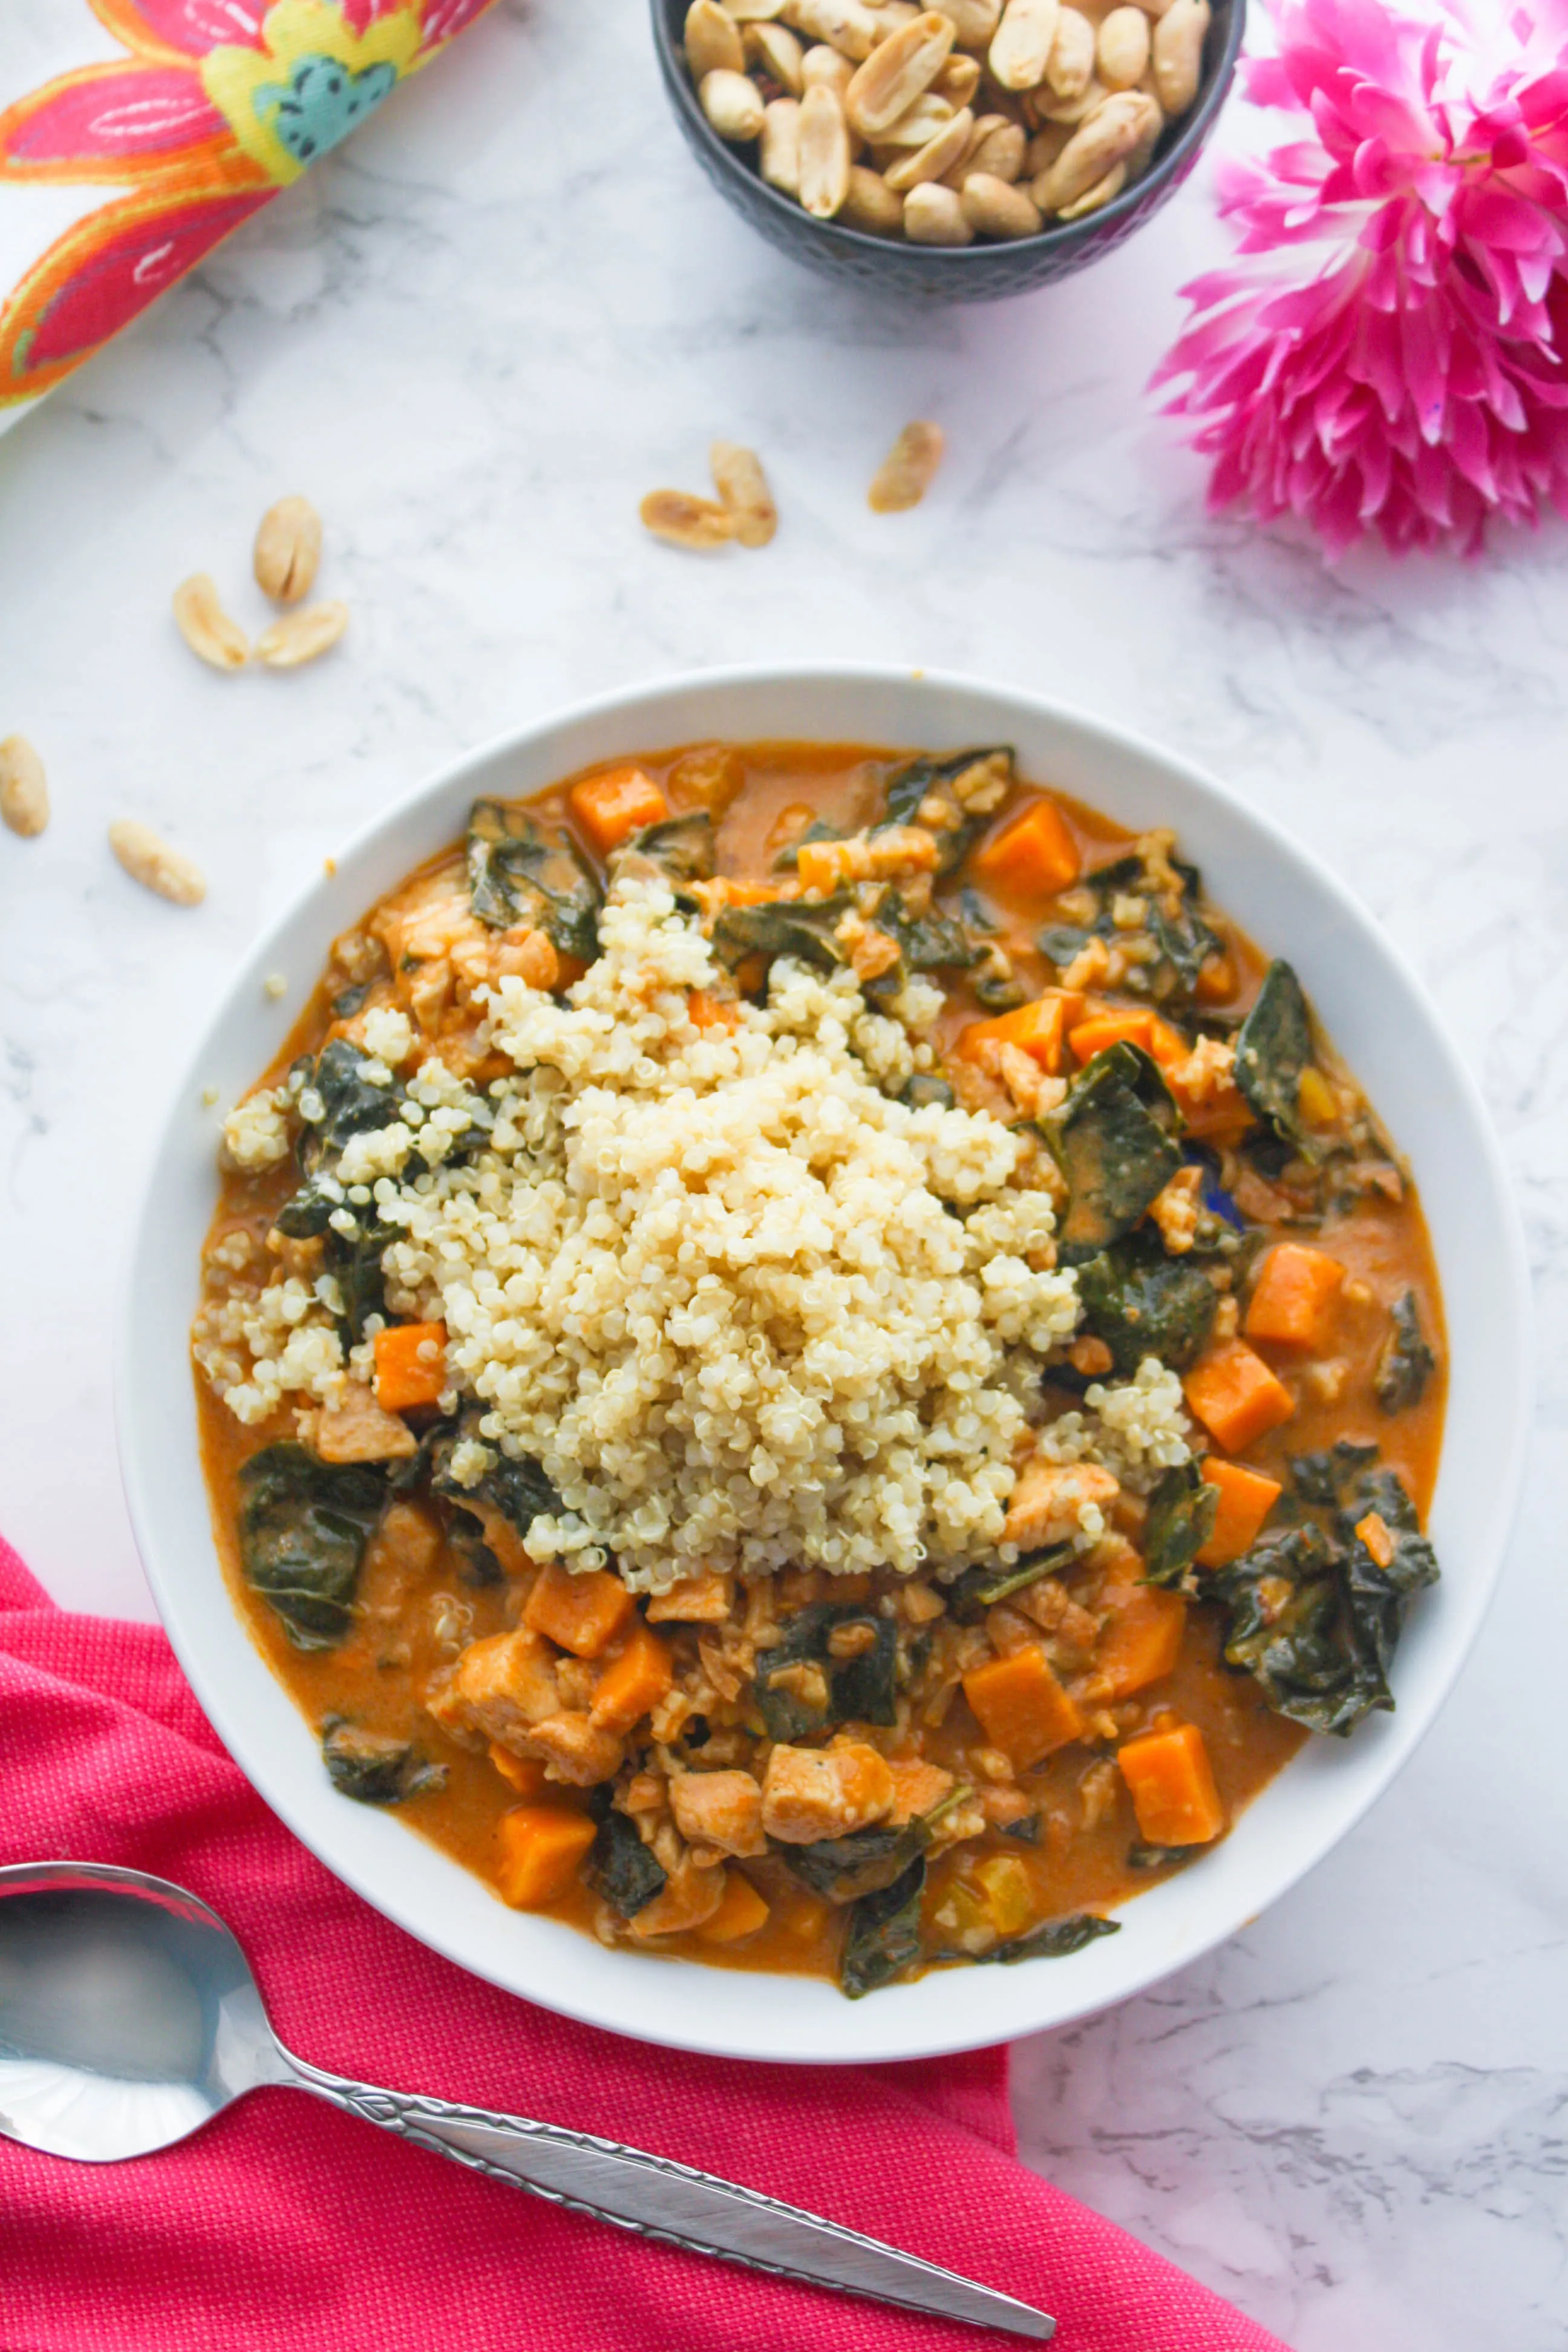 West African Peanut Stew is such a wonderful dish for your next meal. West African Peanut Stew is a beautiful and tasty dish.